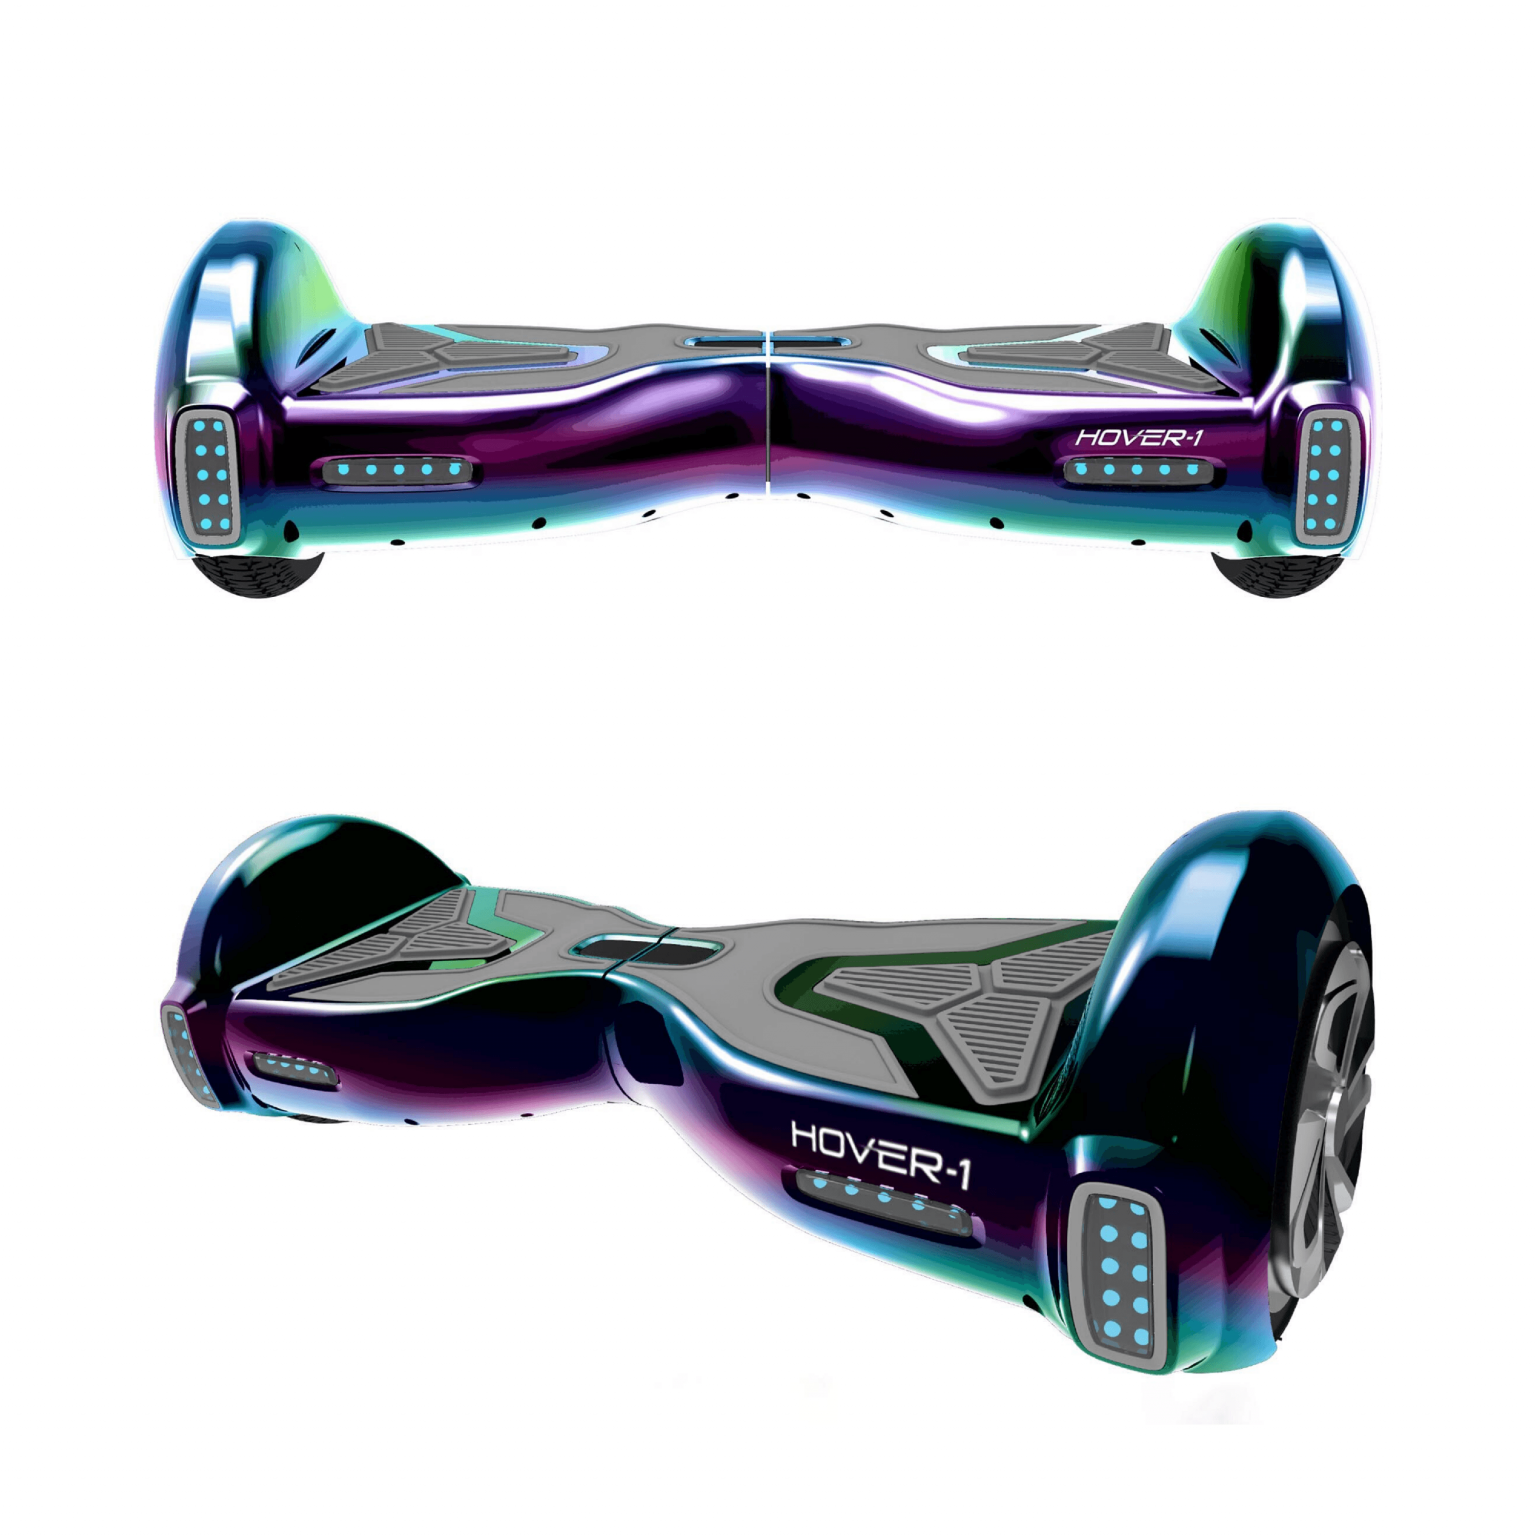 Hover1 H1 UL Certified Electric Hoverboard w/ 6.5 Wheels, LED Lights